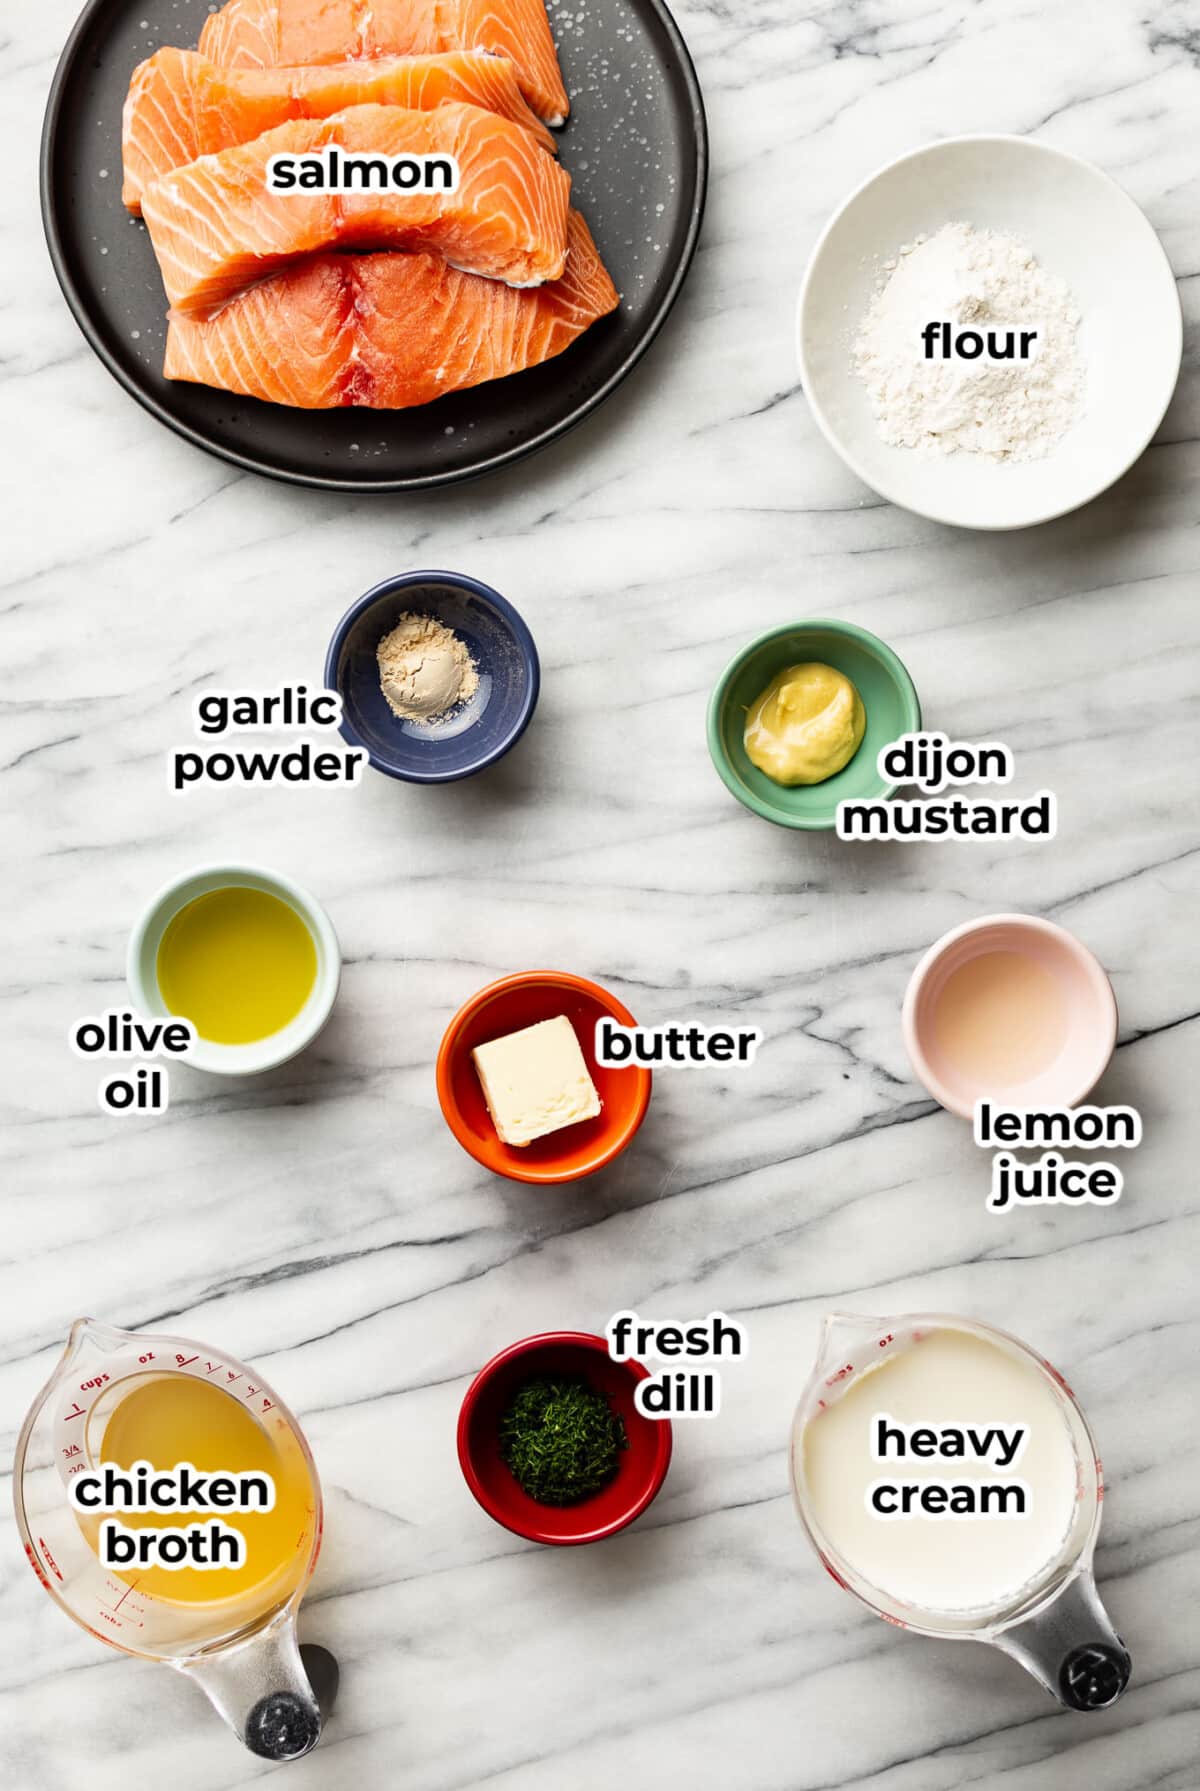 ingredients for salmon with dill sauce in prep bowls